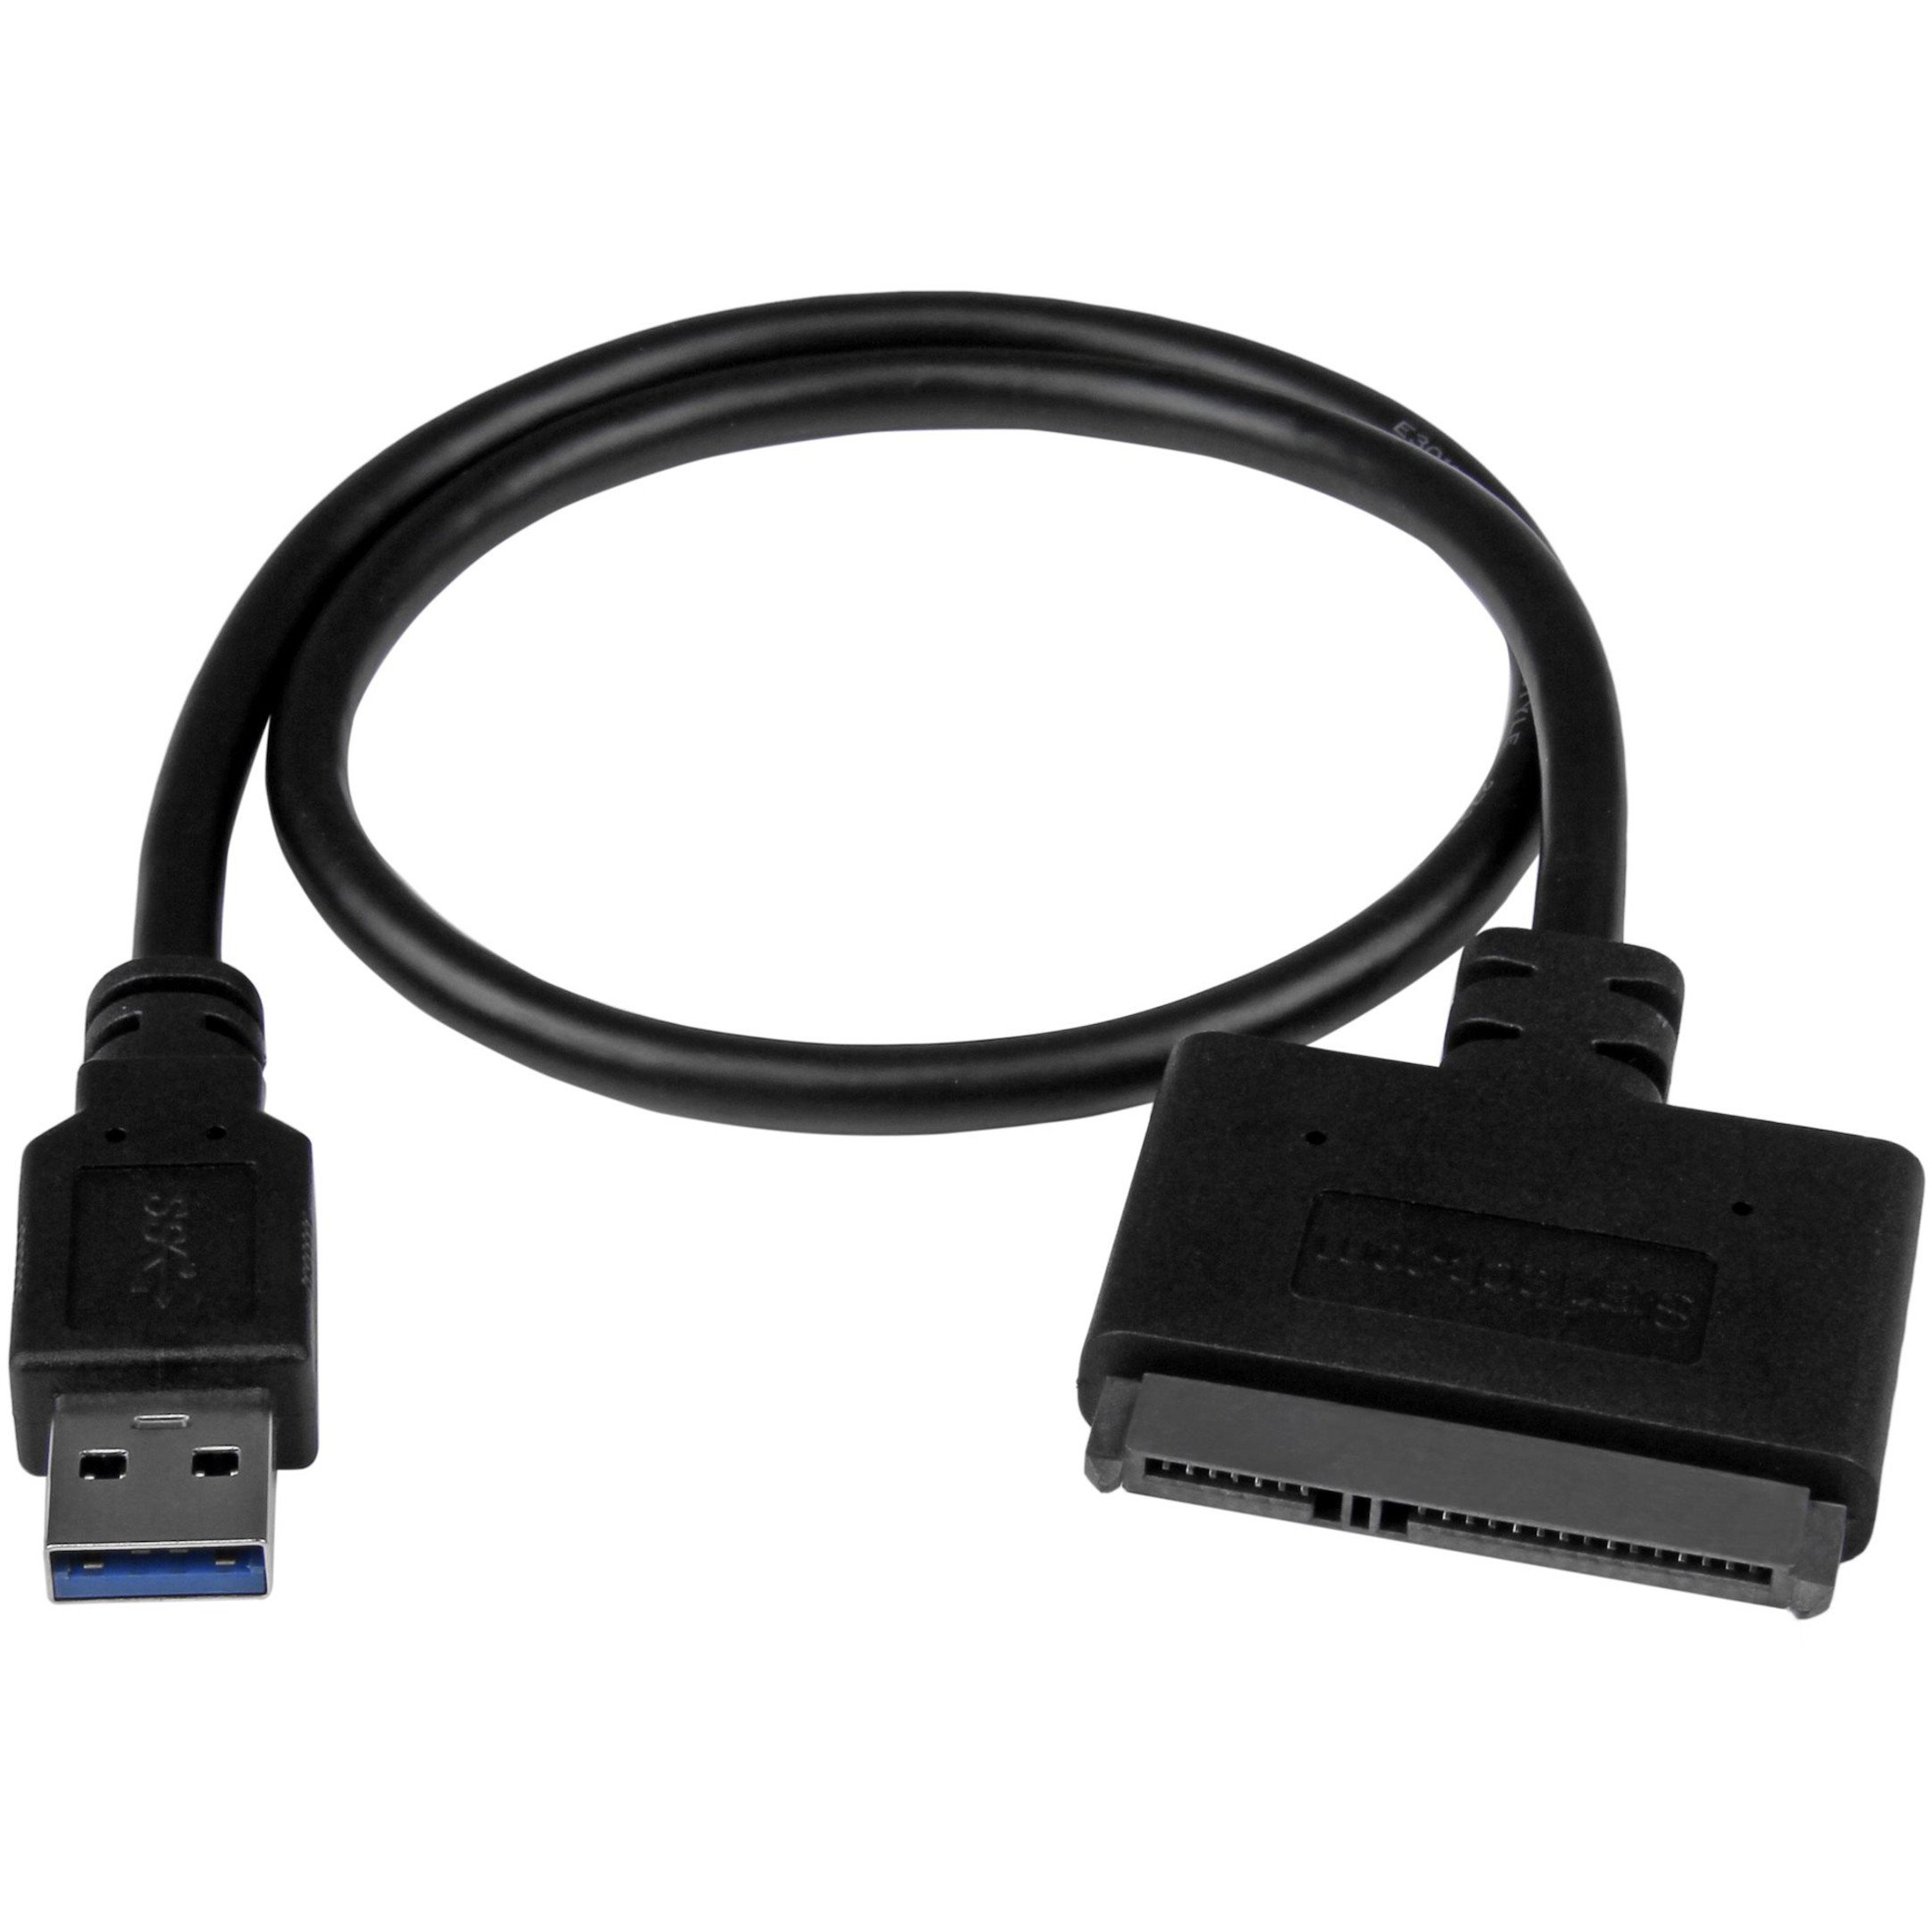 Startech .com USB Adapter Cable for 2.5" SATA DrivesConnect a 2.5" SATA SSD/HDD to your computer using this USB 3.1... USB312SAT3CB - Corporate Armor